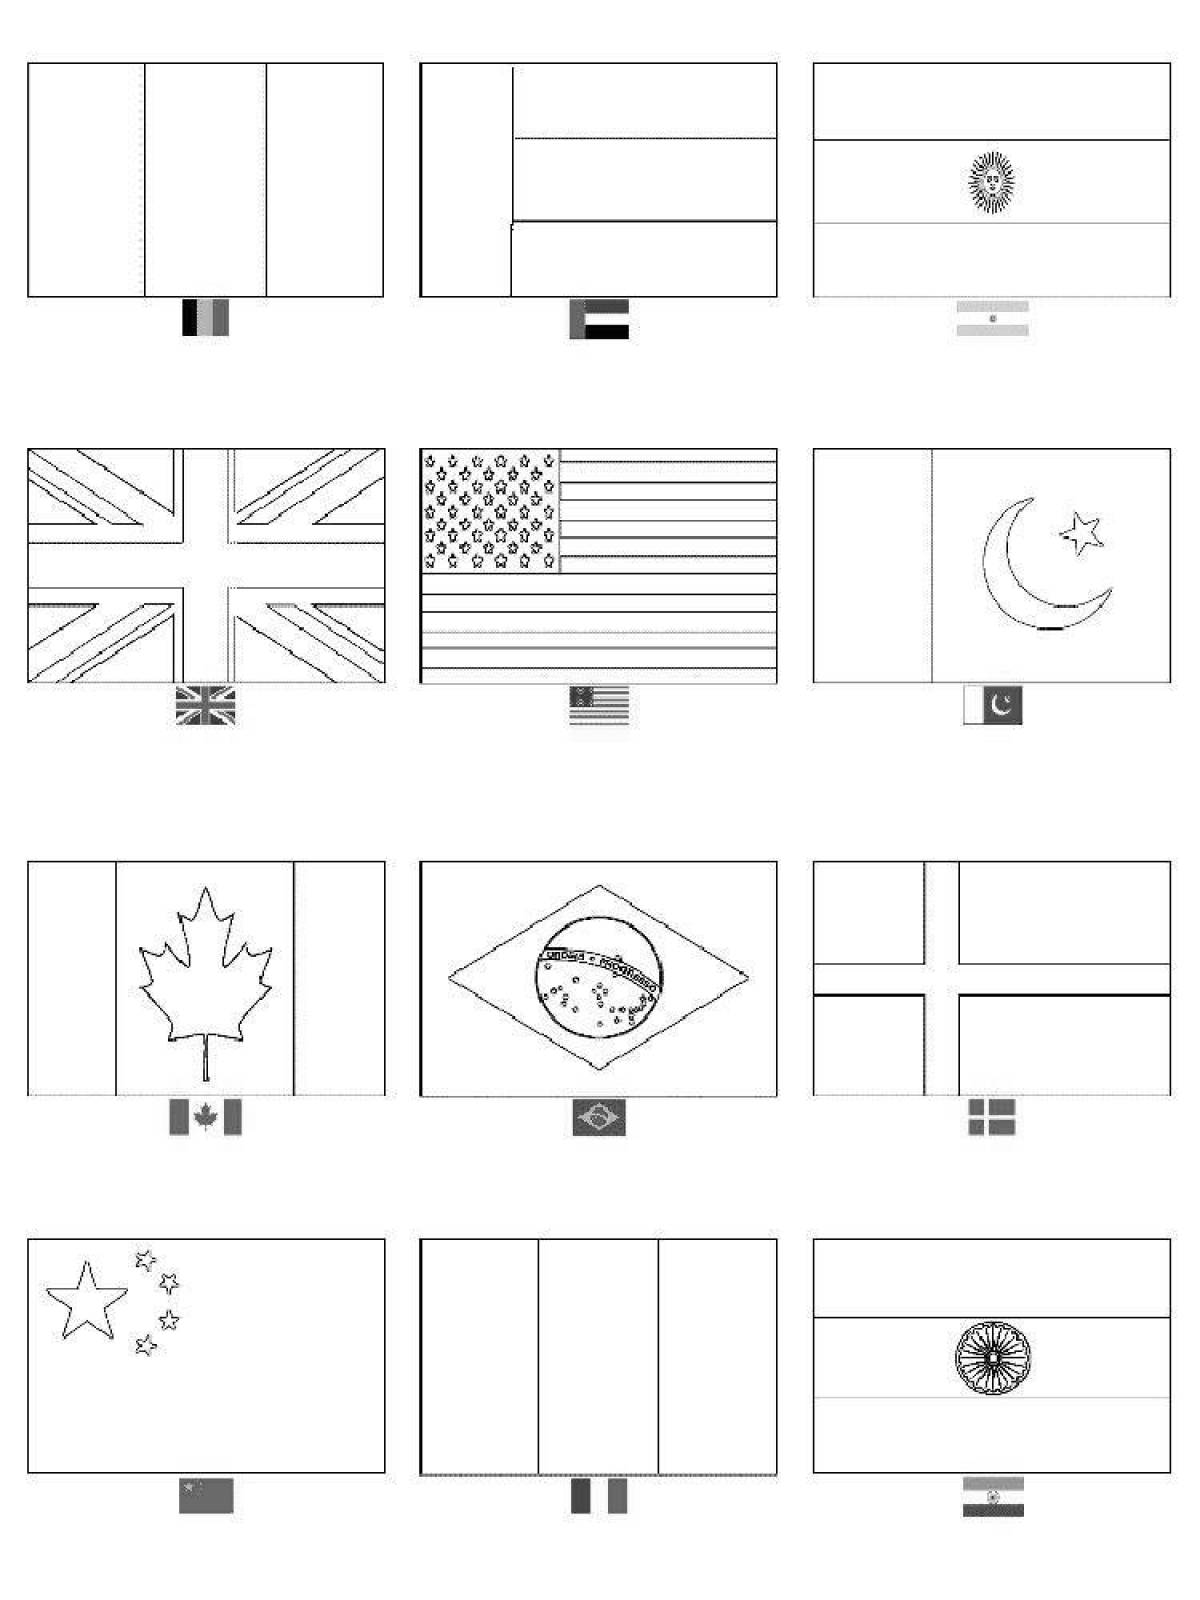 Incredible flags of the world coloring book